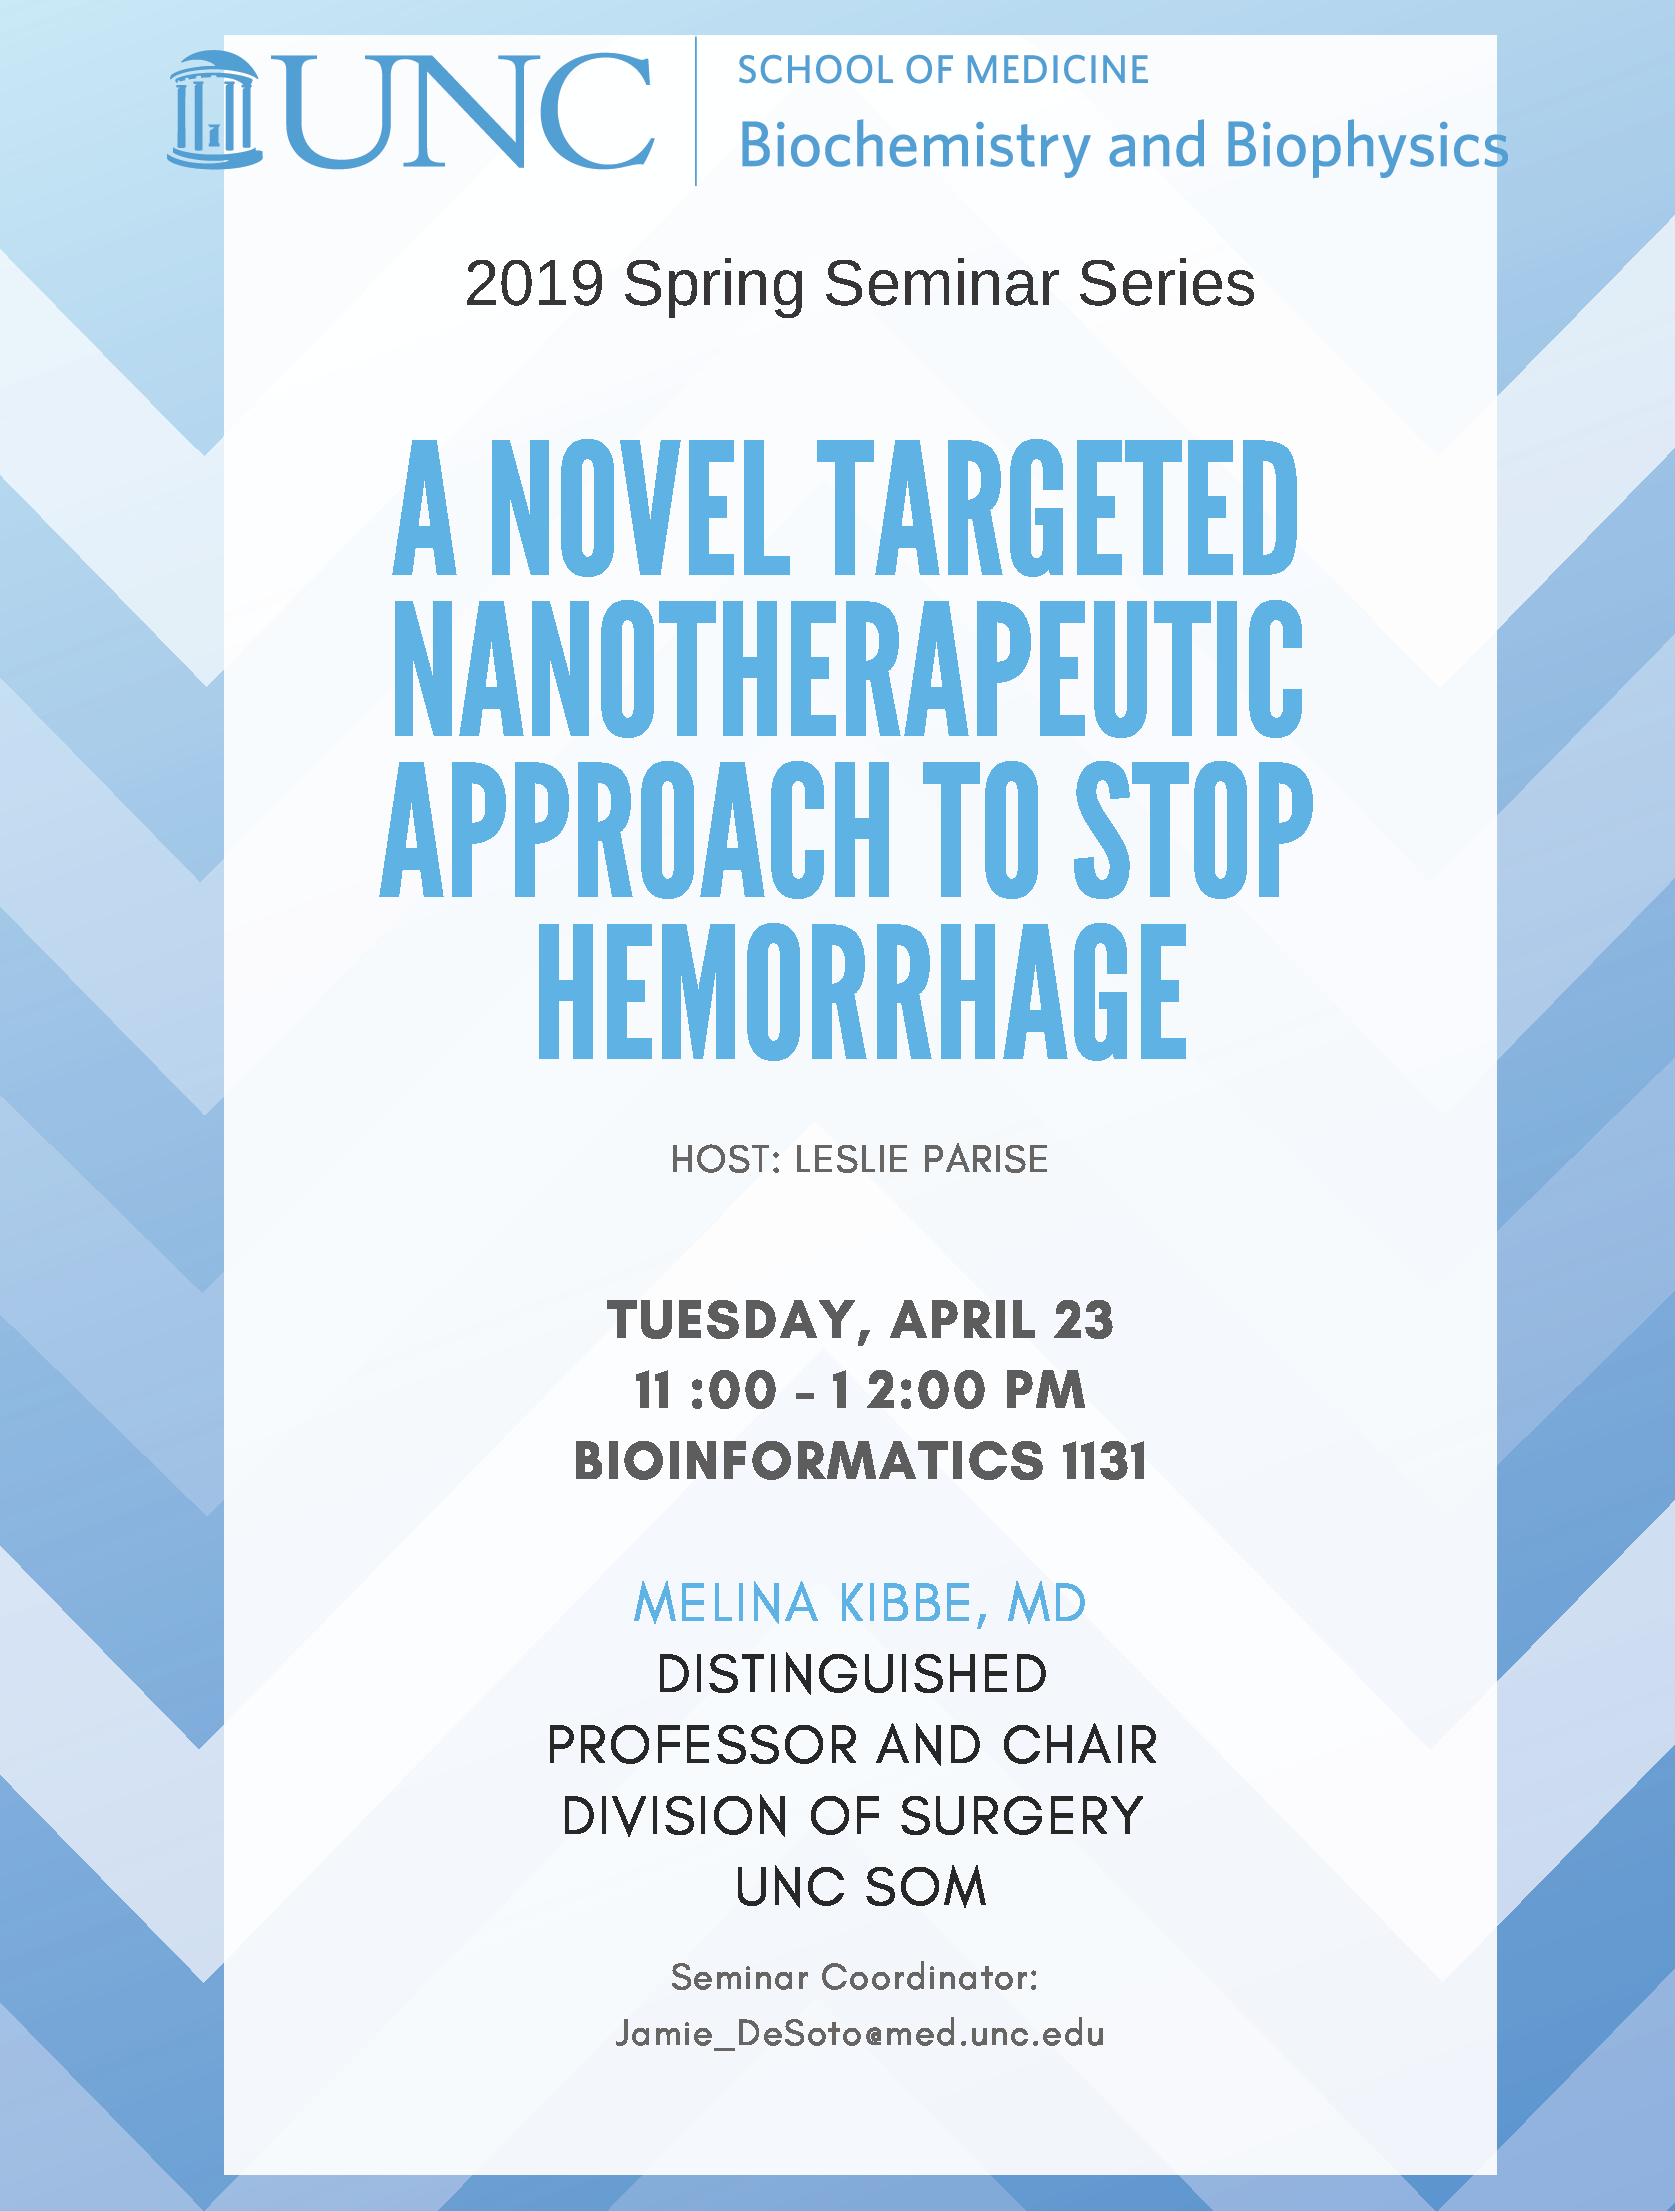 M Kibbe seminar A NOVEL TARGETED NANOTHERAPEUTIC APPROACH TO STOP HEMORRHAGE on April 23 11:00am